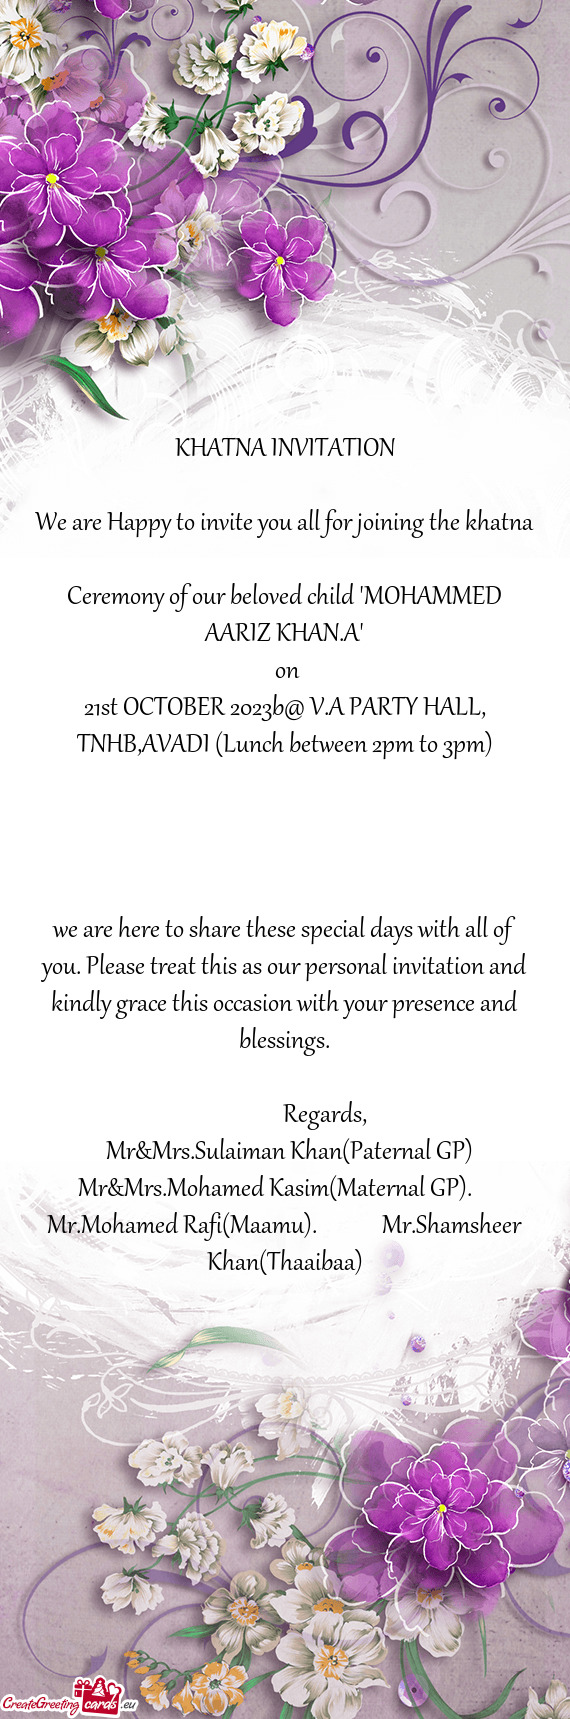 We are Happy to invite you all for joining the khatna Ceremony of our beloved child "MOHAMMED AARIZ